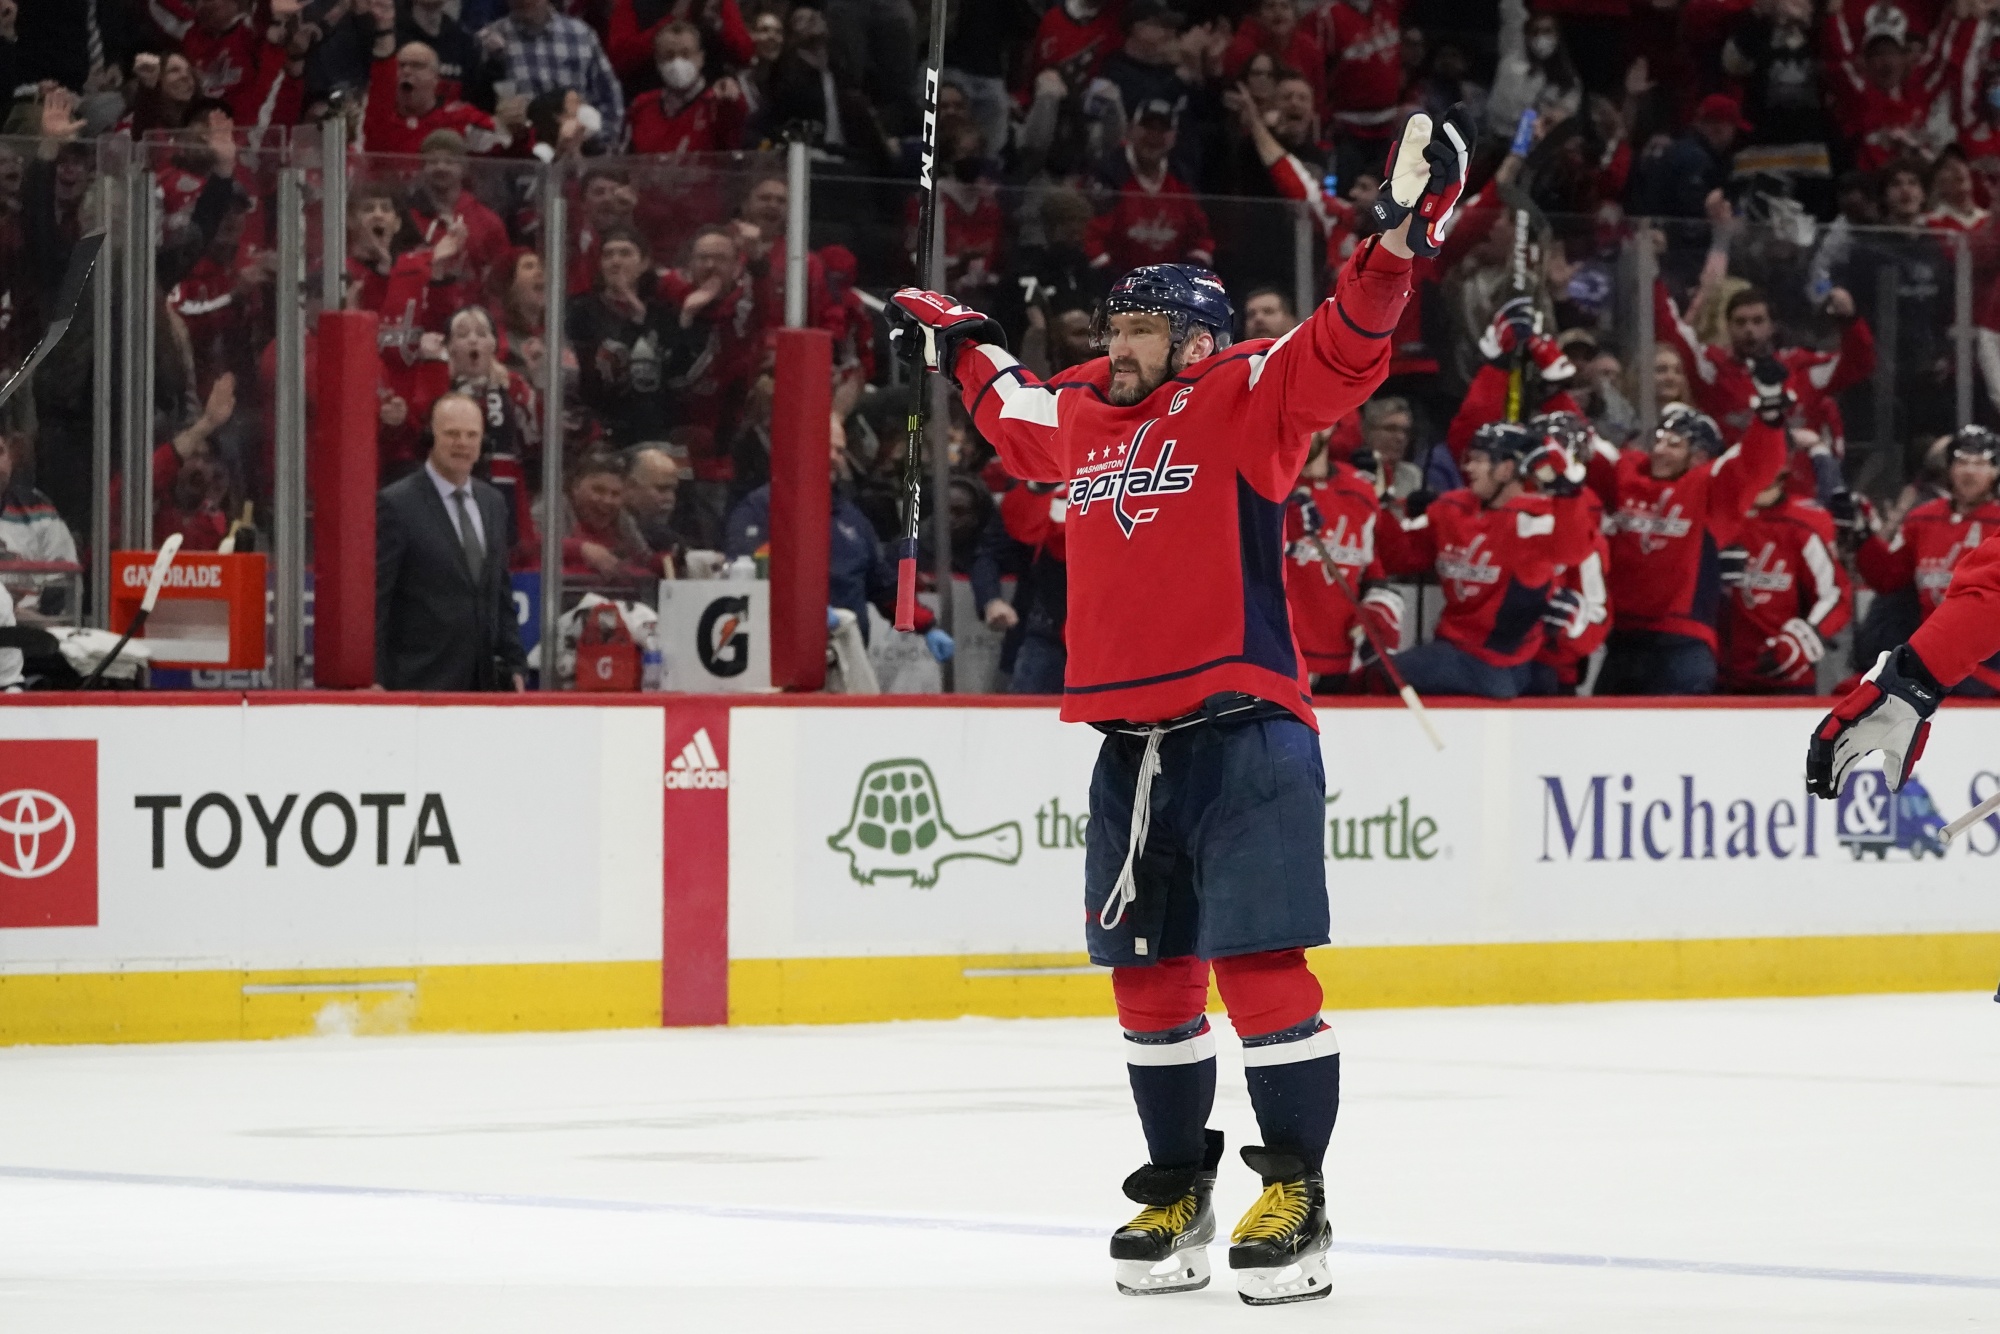 Alex Ovechkin on the trail of Wayne Gretzky's NHL goals record and